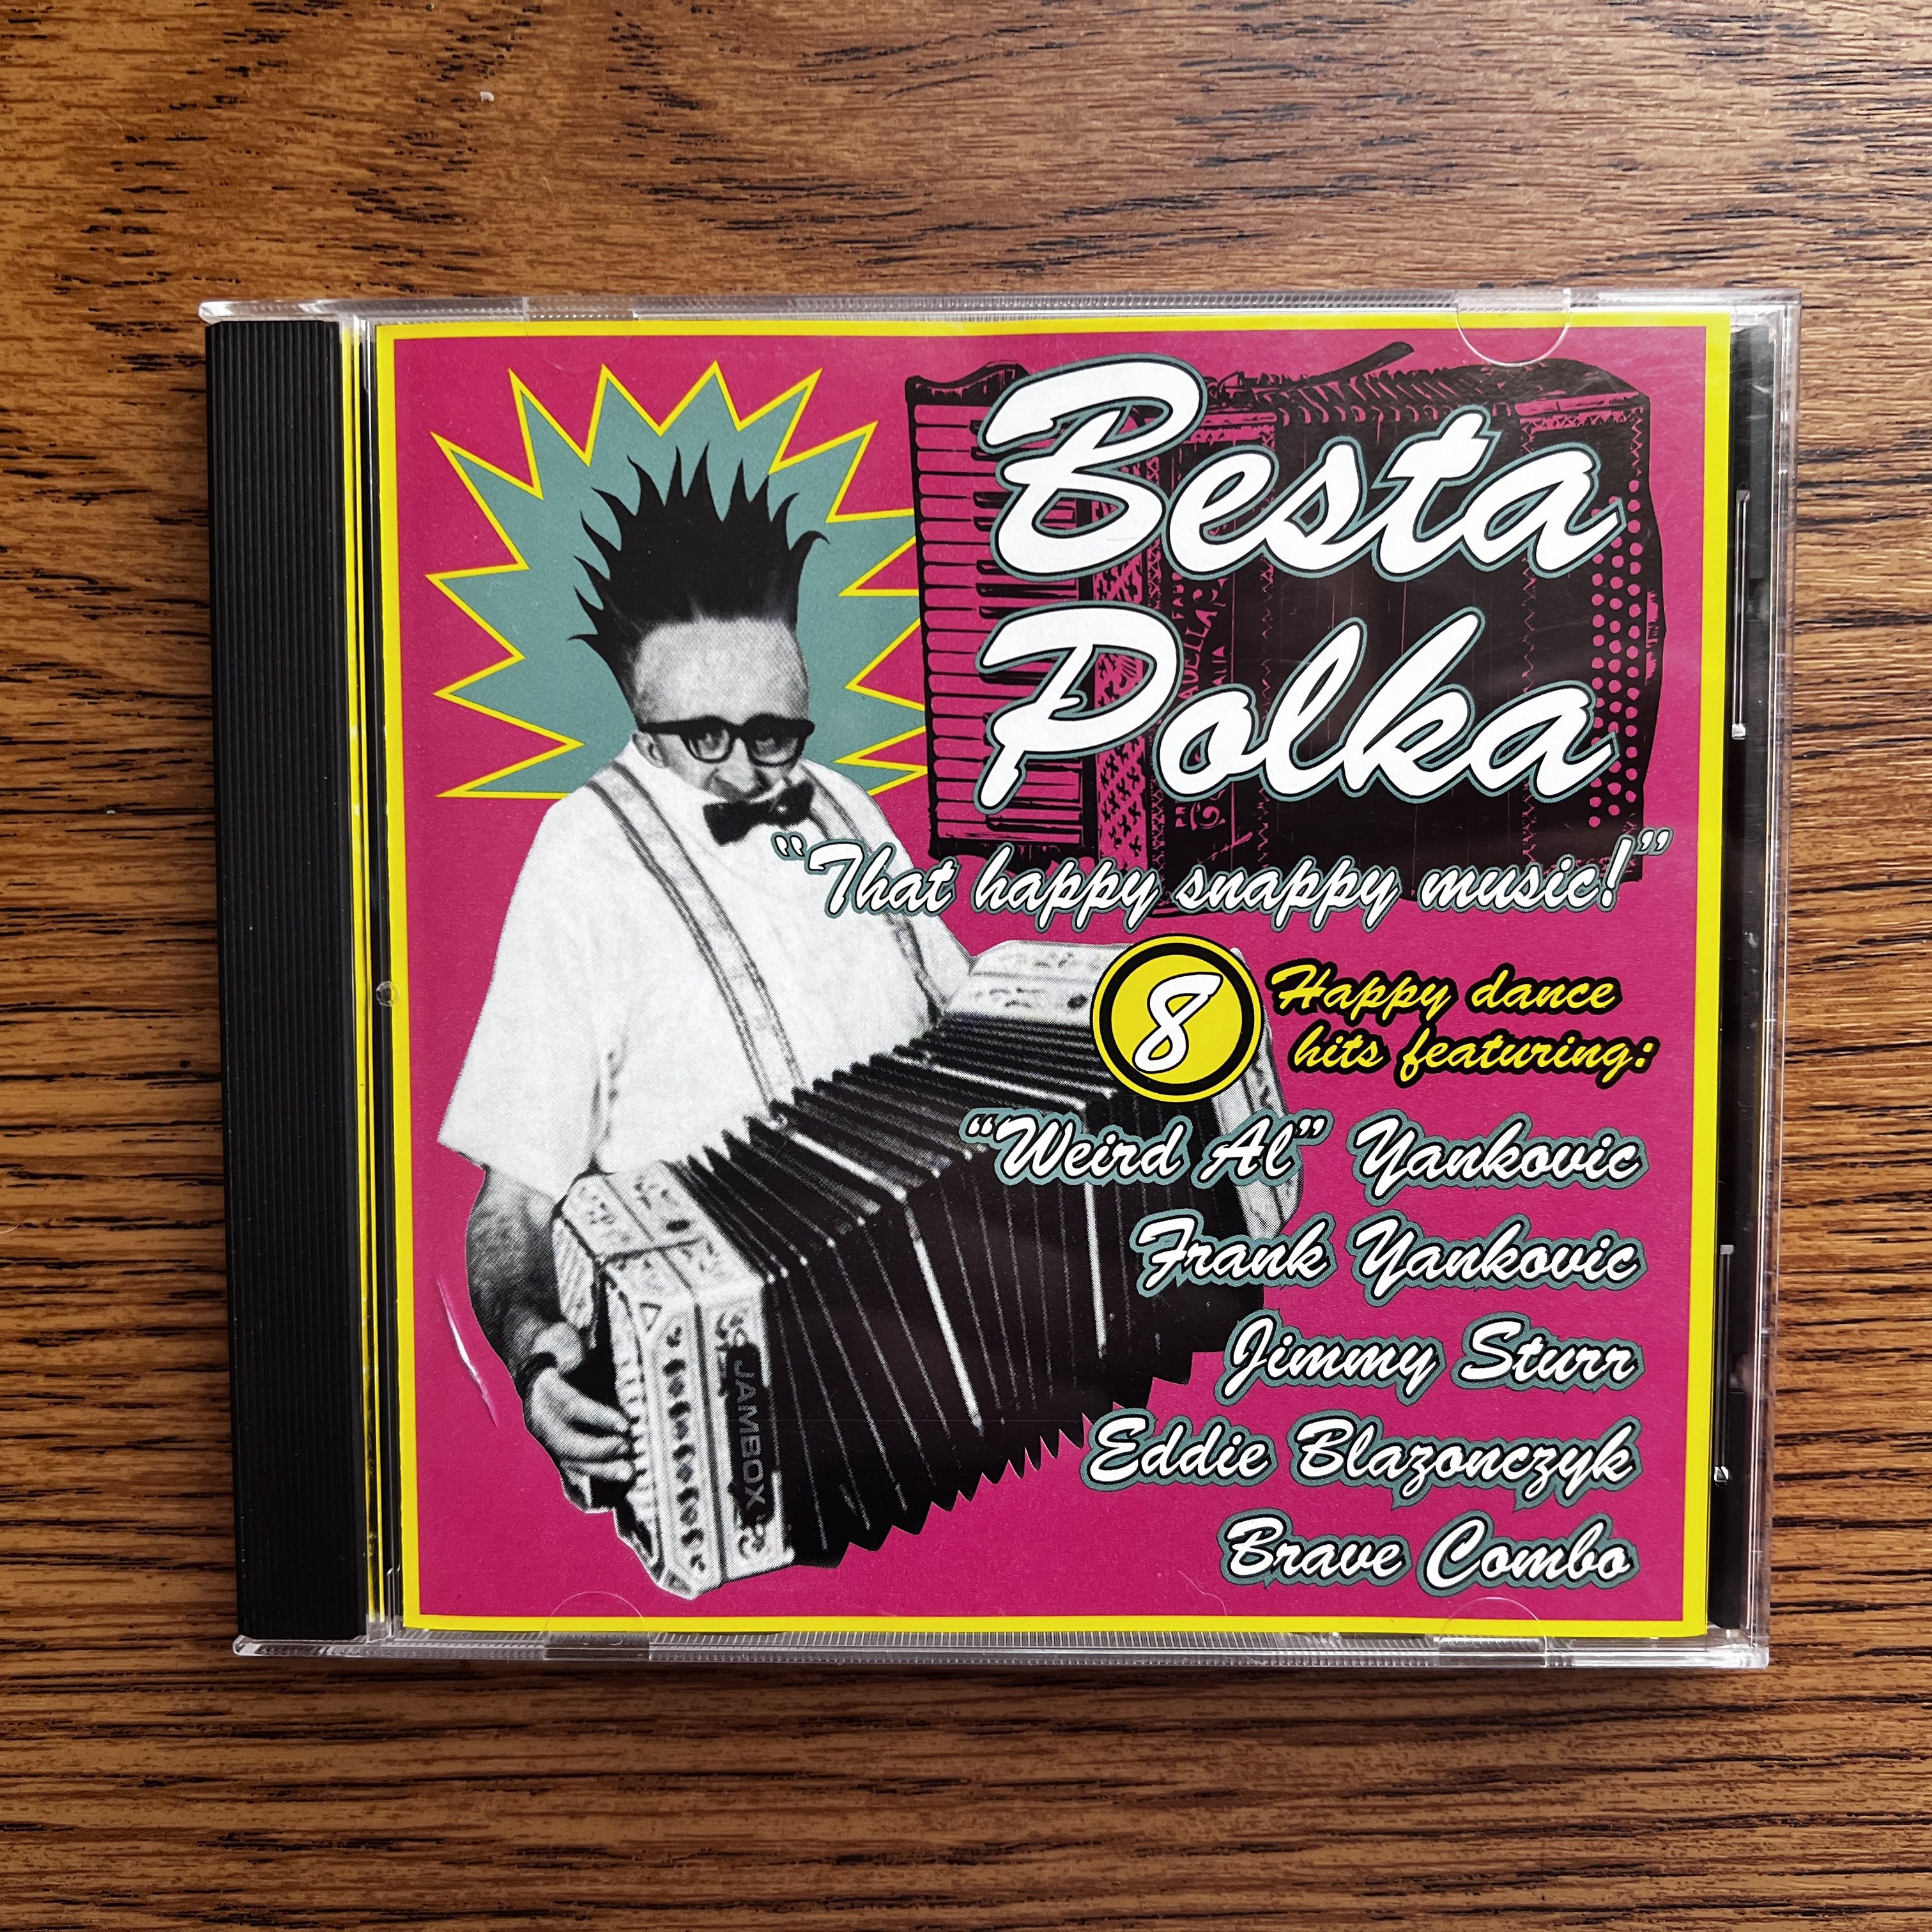 Photograph of a CD of Besta Polka: That Happy Snappy Music